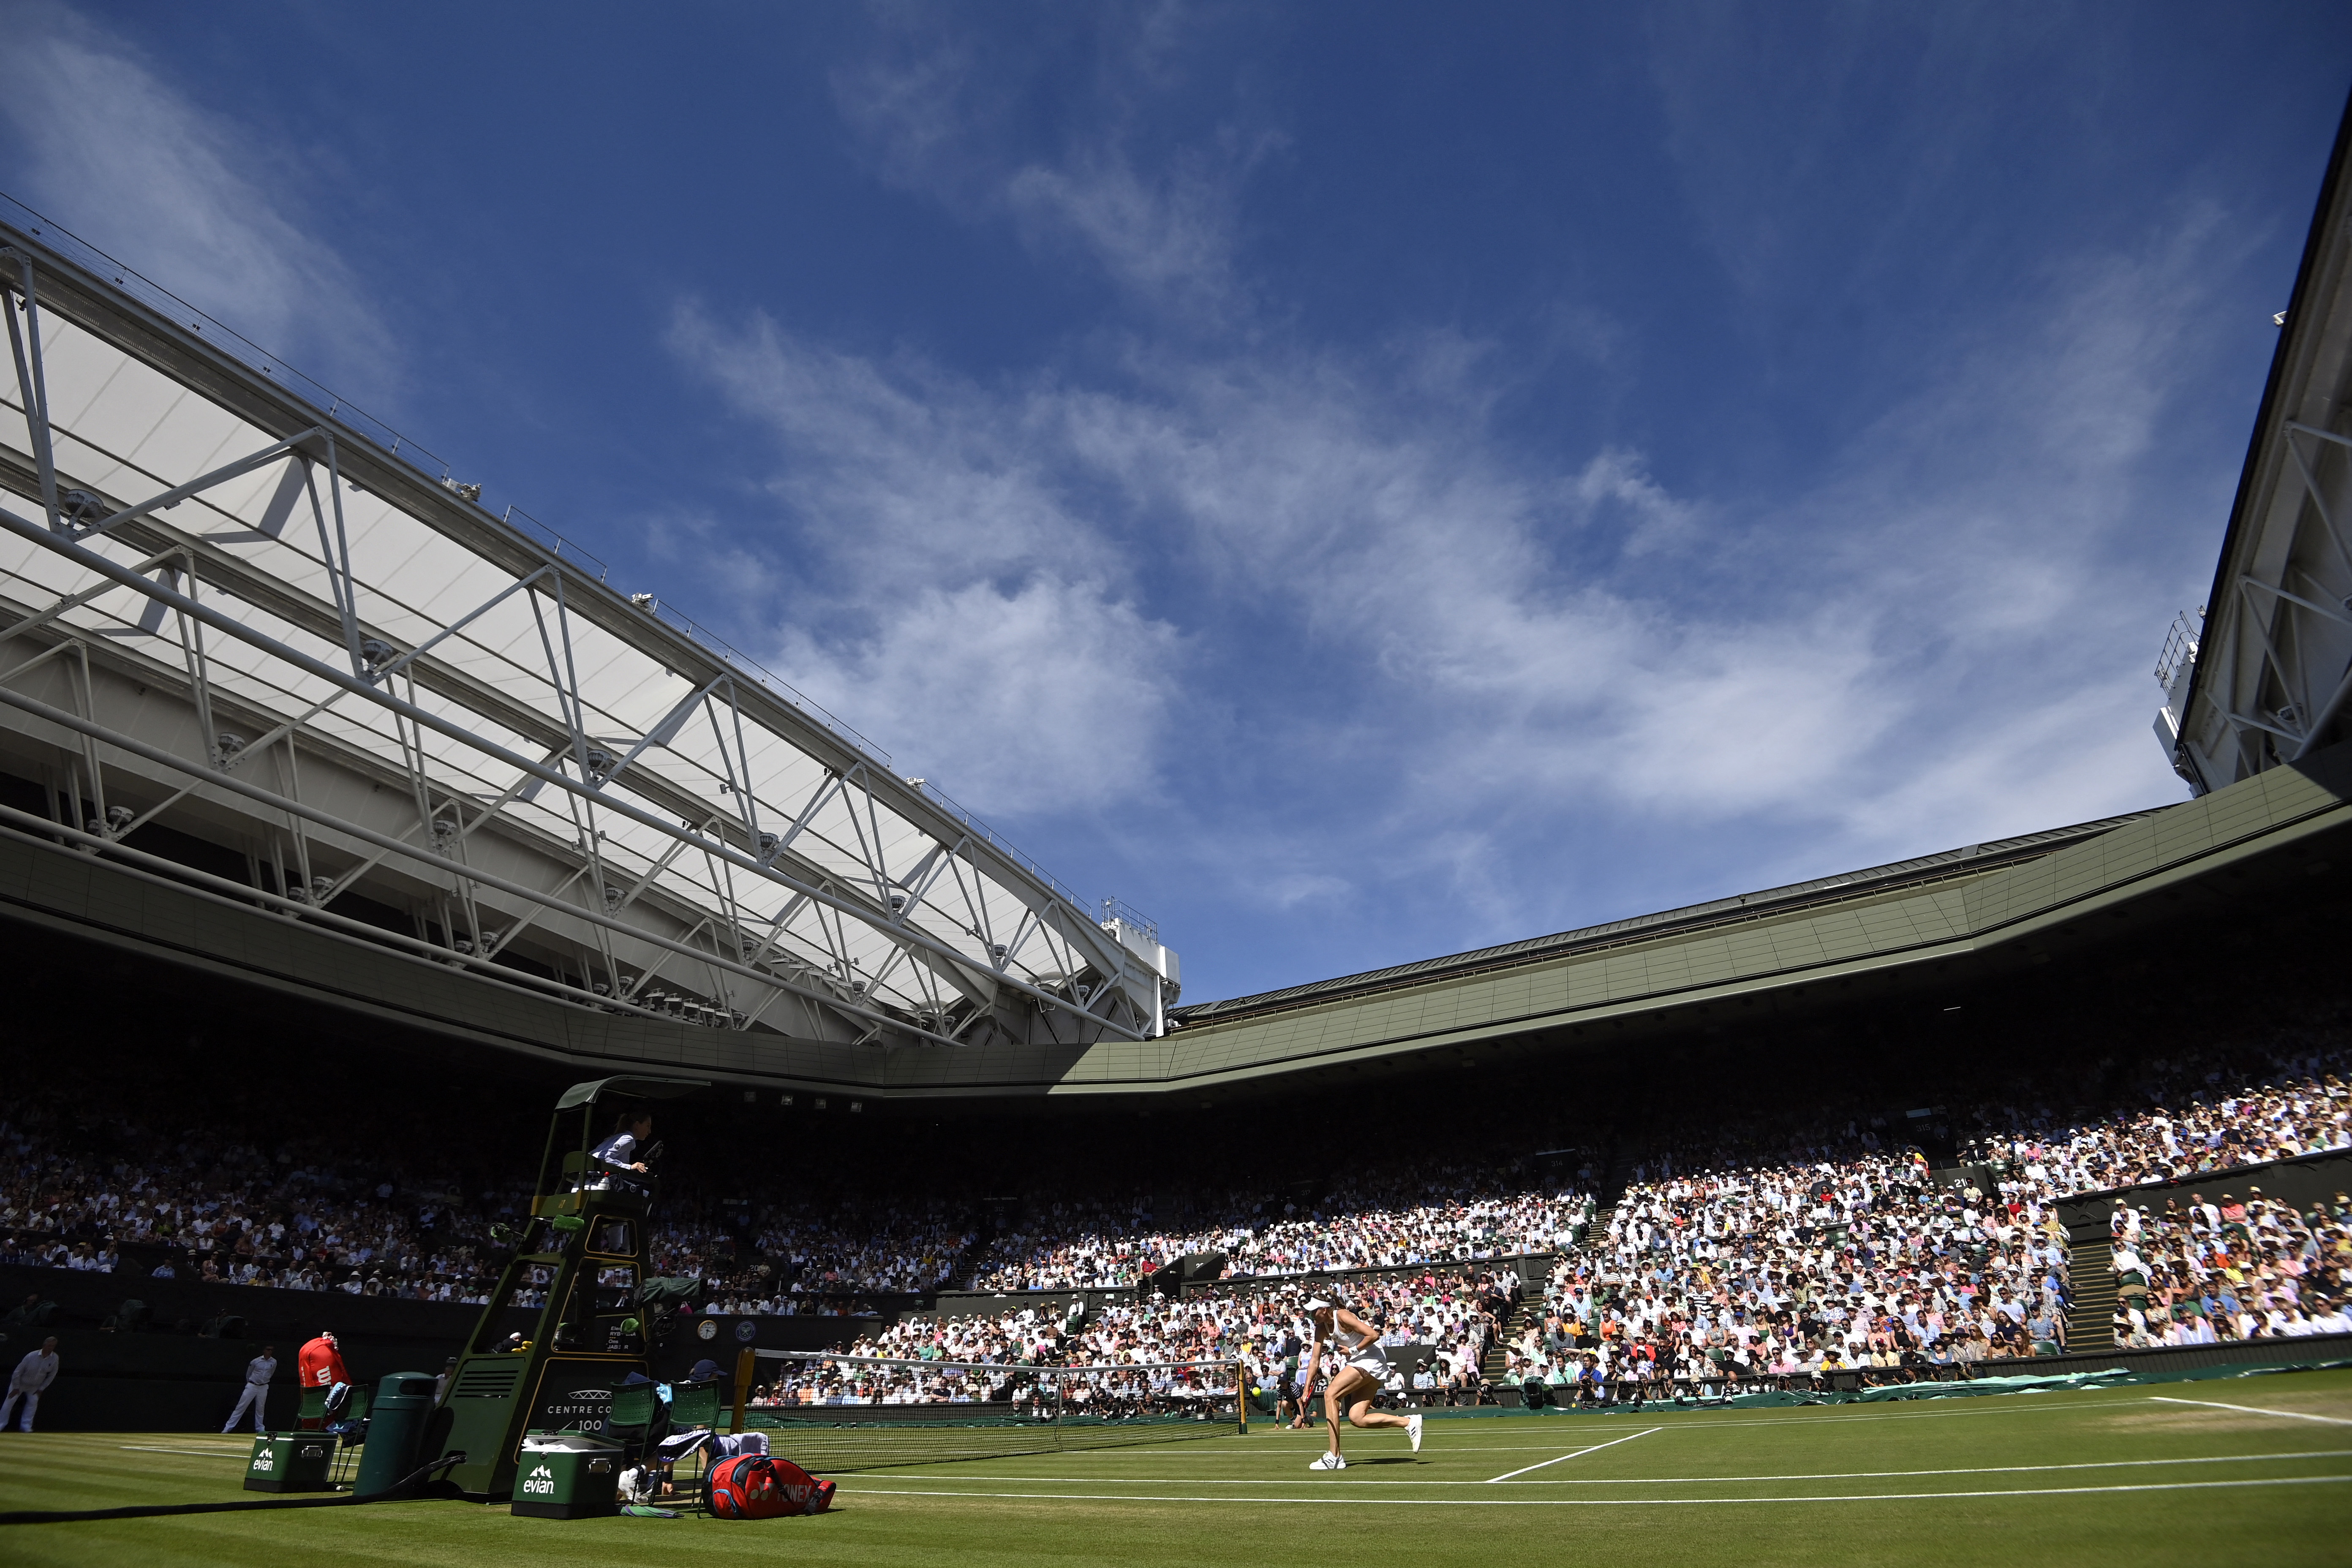 Women playing at Wimbledon will be allowed to wear dark-coloured underwear  following period concerns, UK News